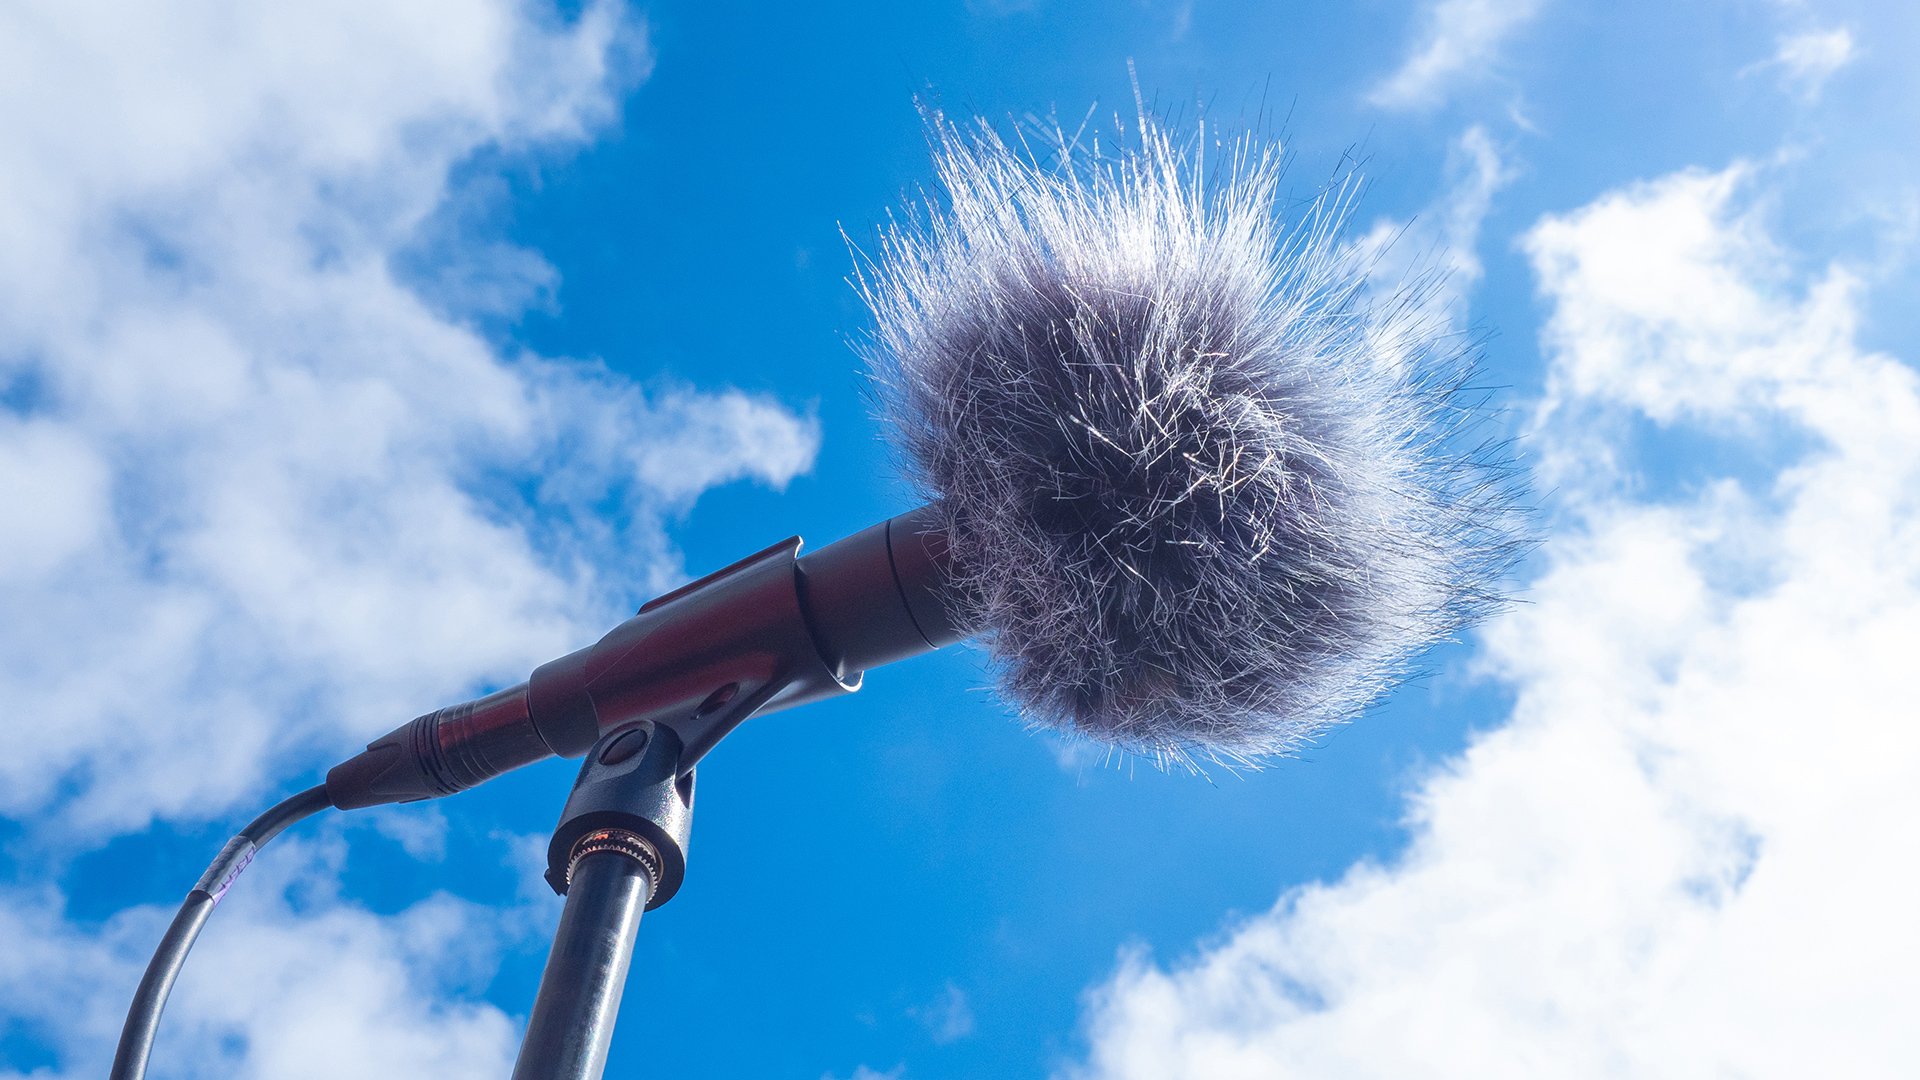 How to reduce wind noise in audio.